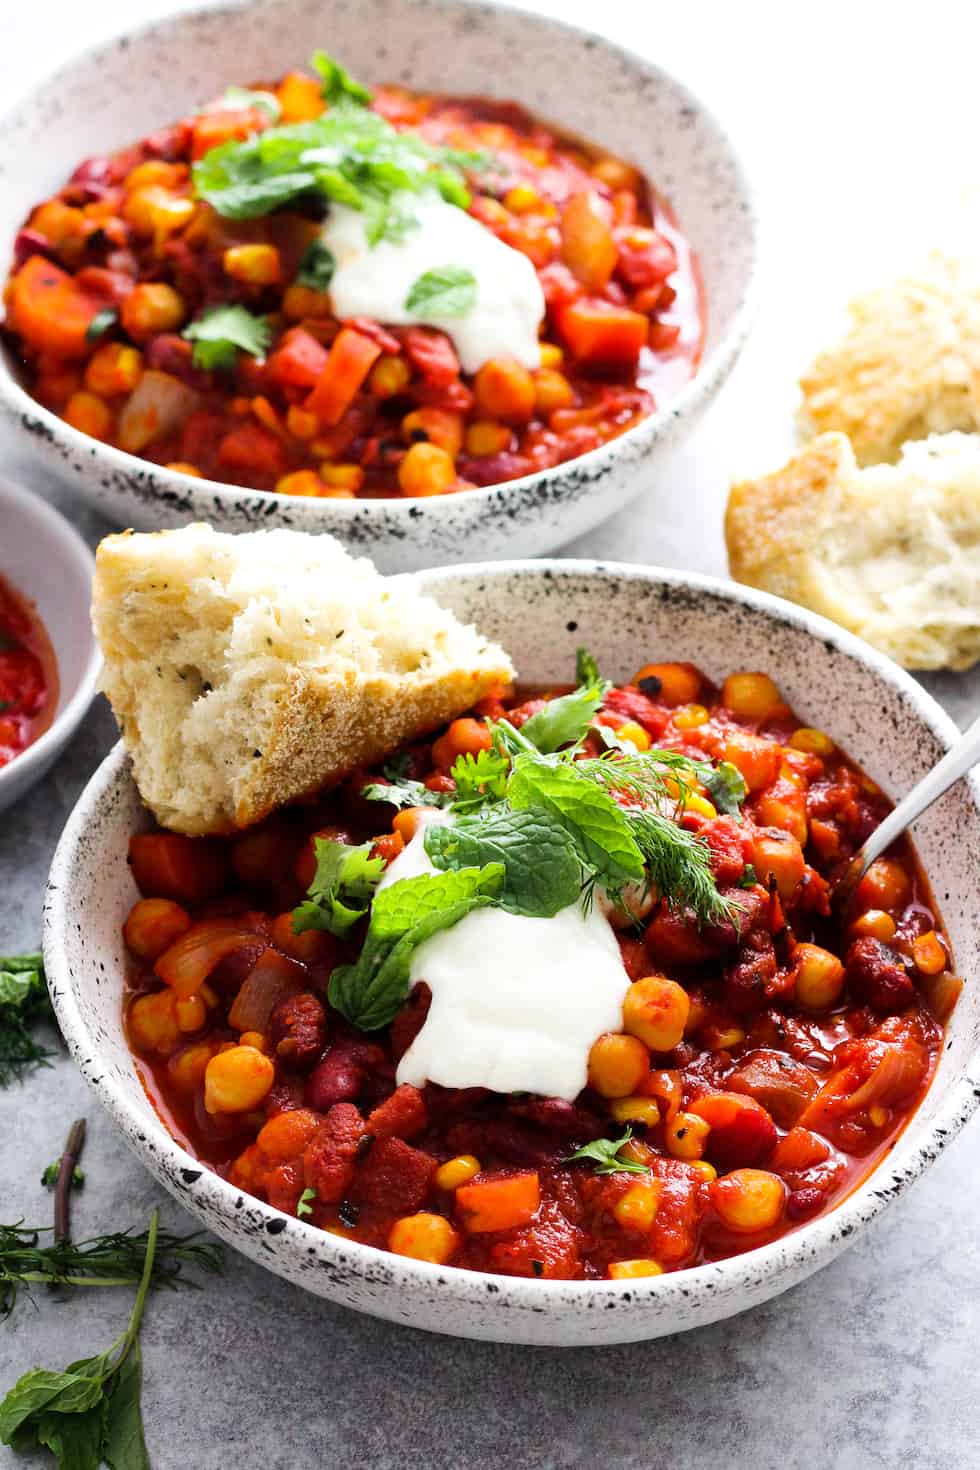 Bean chili with harissa in white stoneware bowls with bread and fresh herbs on top.